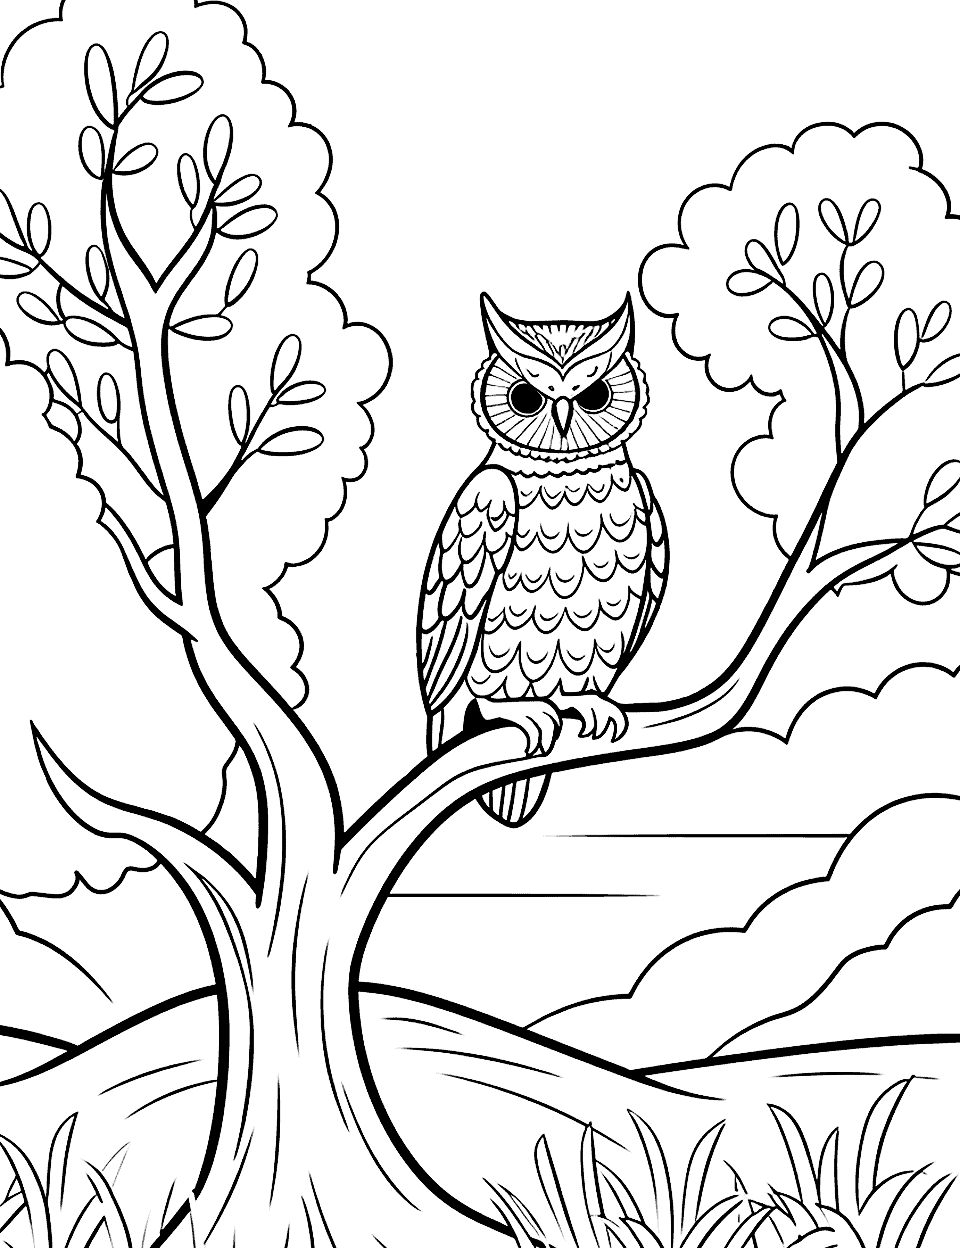 Owl Perched in a Tree at Night Nature Coloring Page - An owl sitting in the branch of a tree at night.